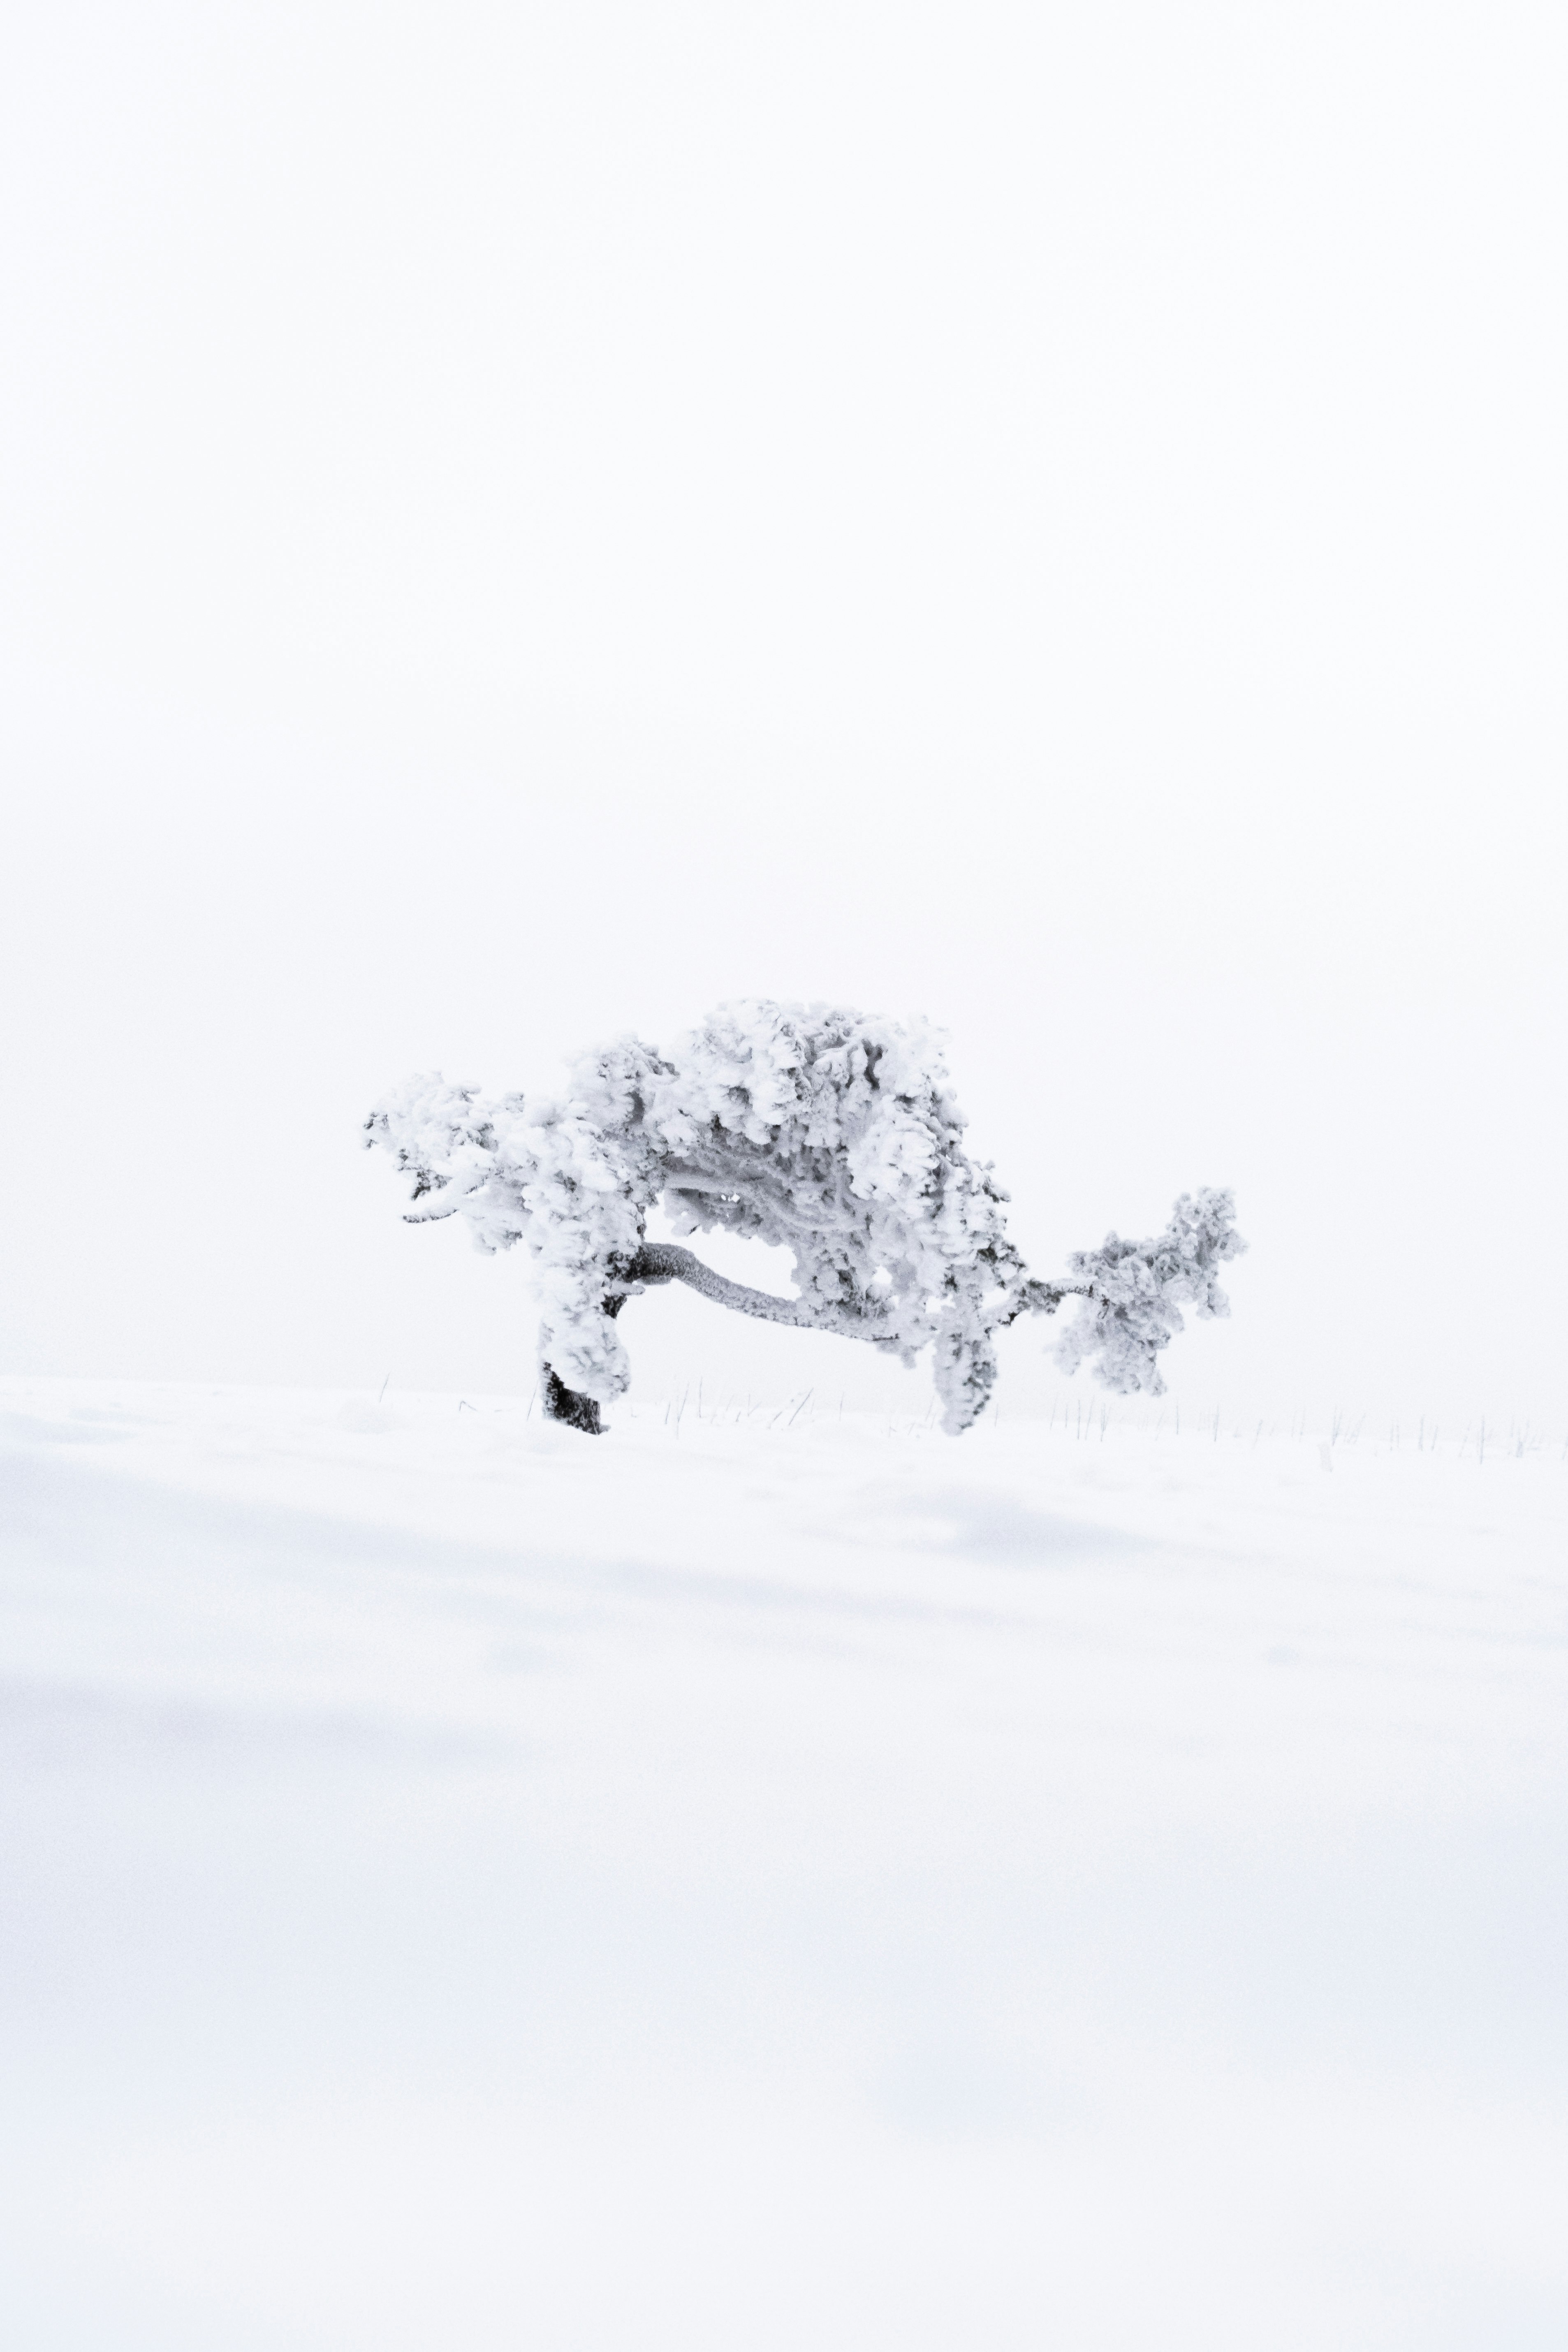 white and black tree on snow covered ground